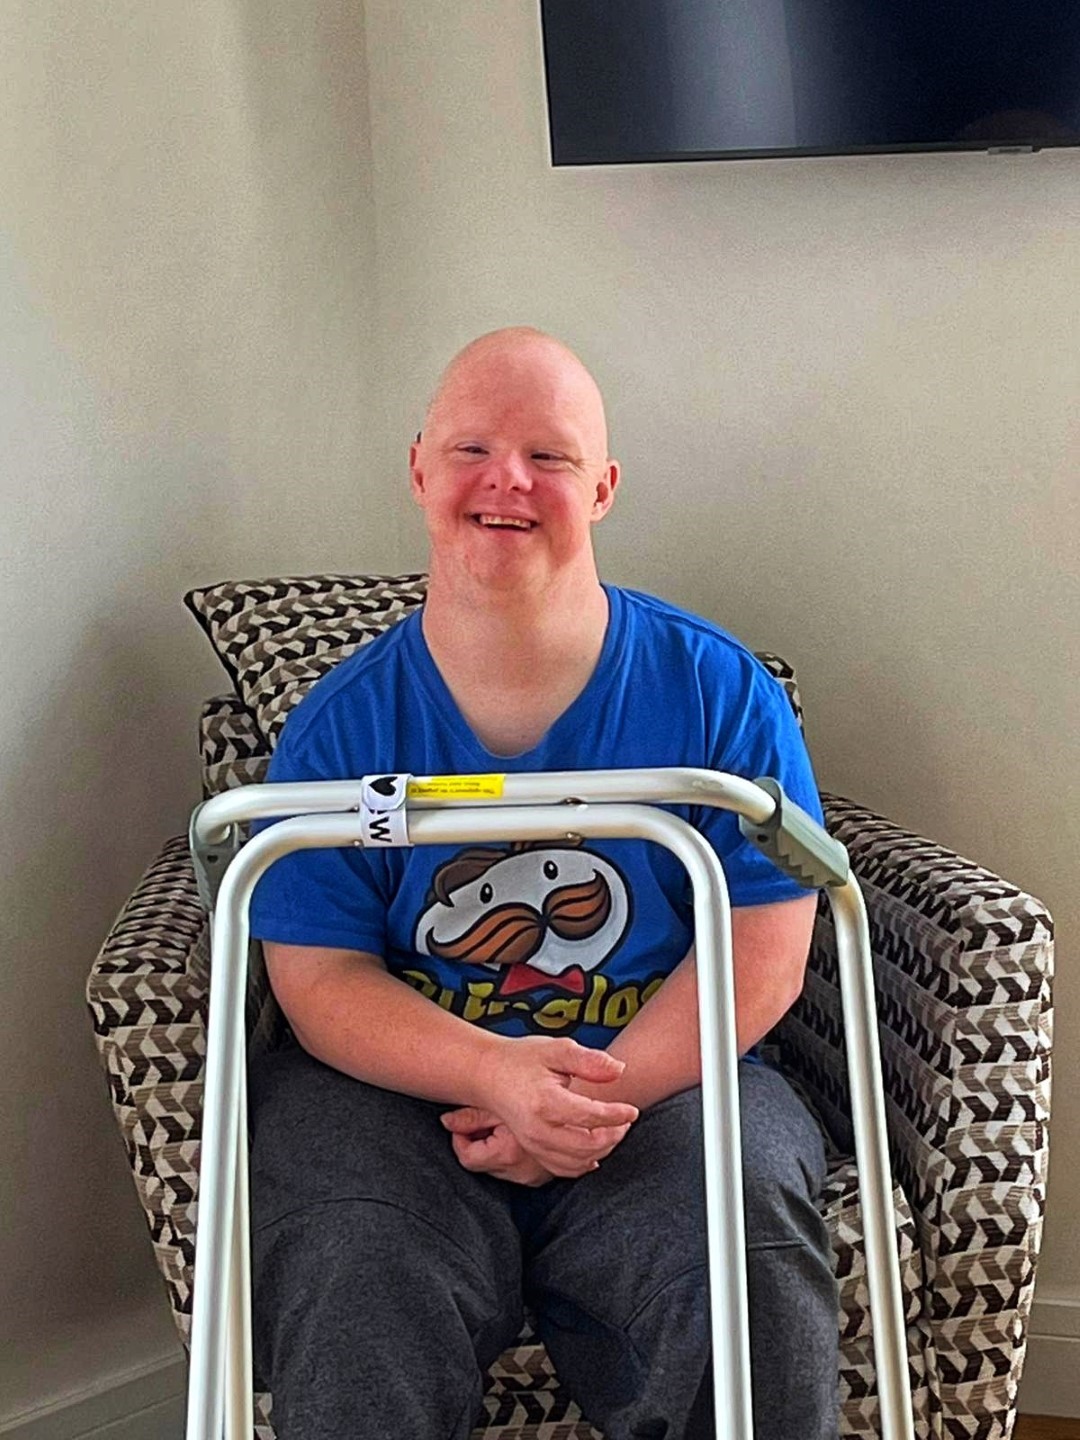 A young man sat in a modern chair with a walking frame. Young man is smiling and wearing a blue t-shirt.